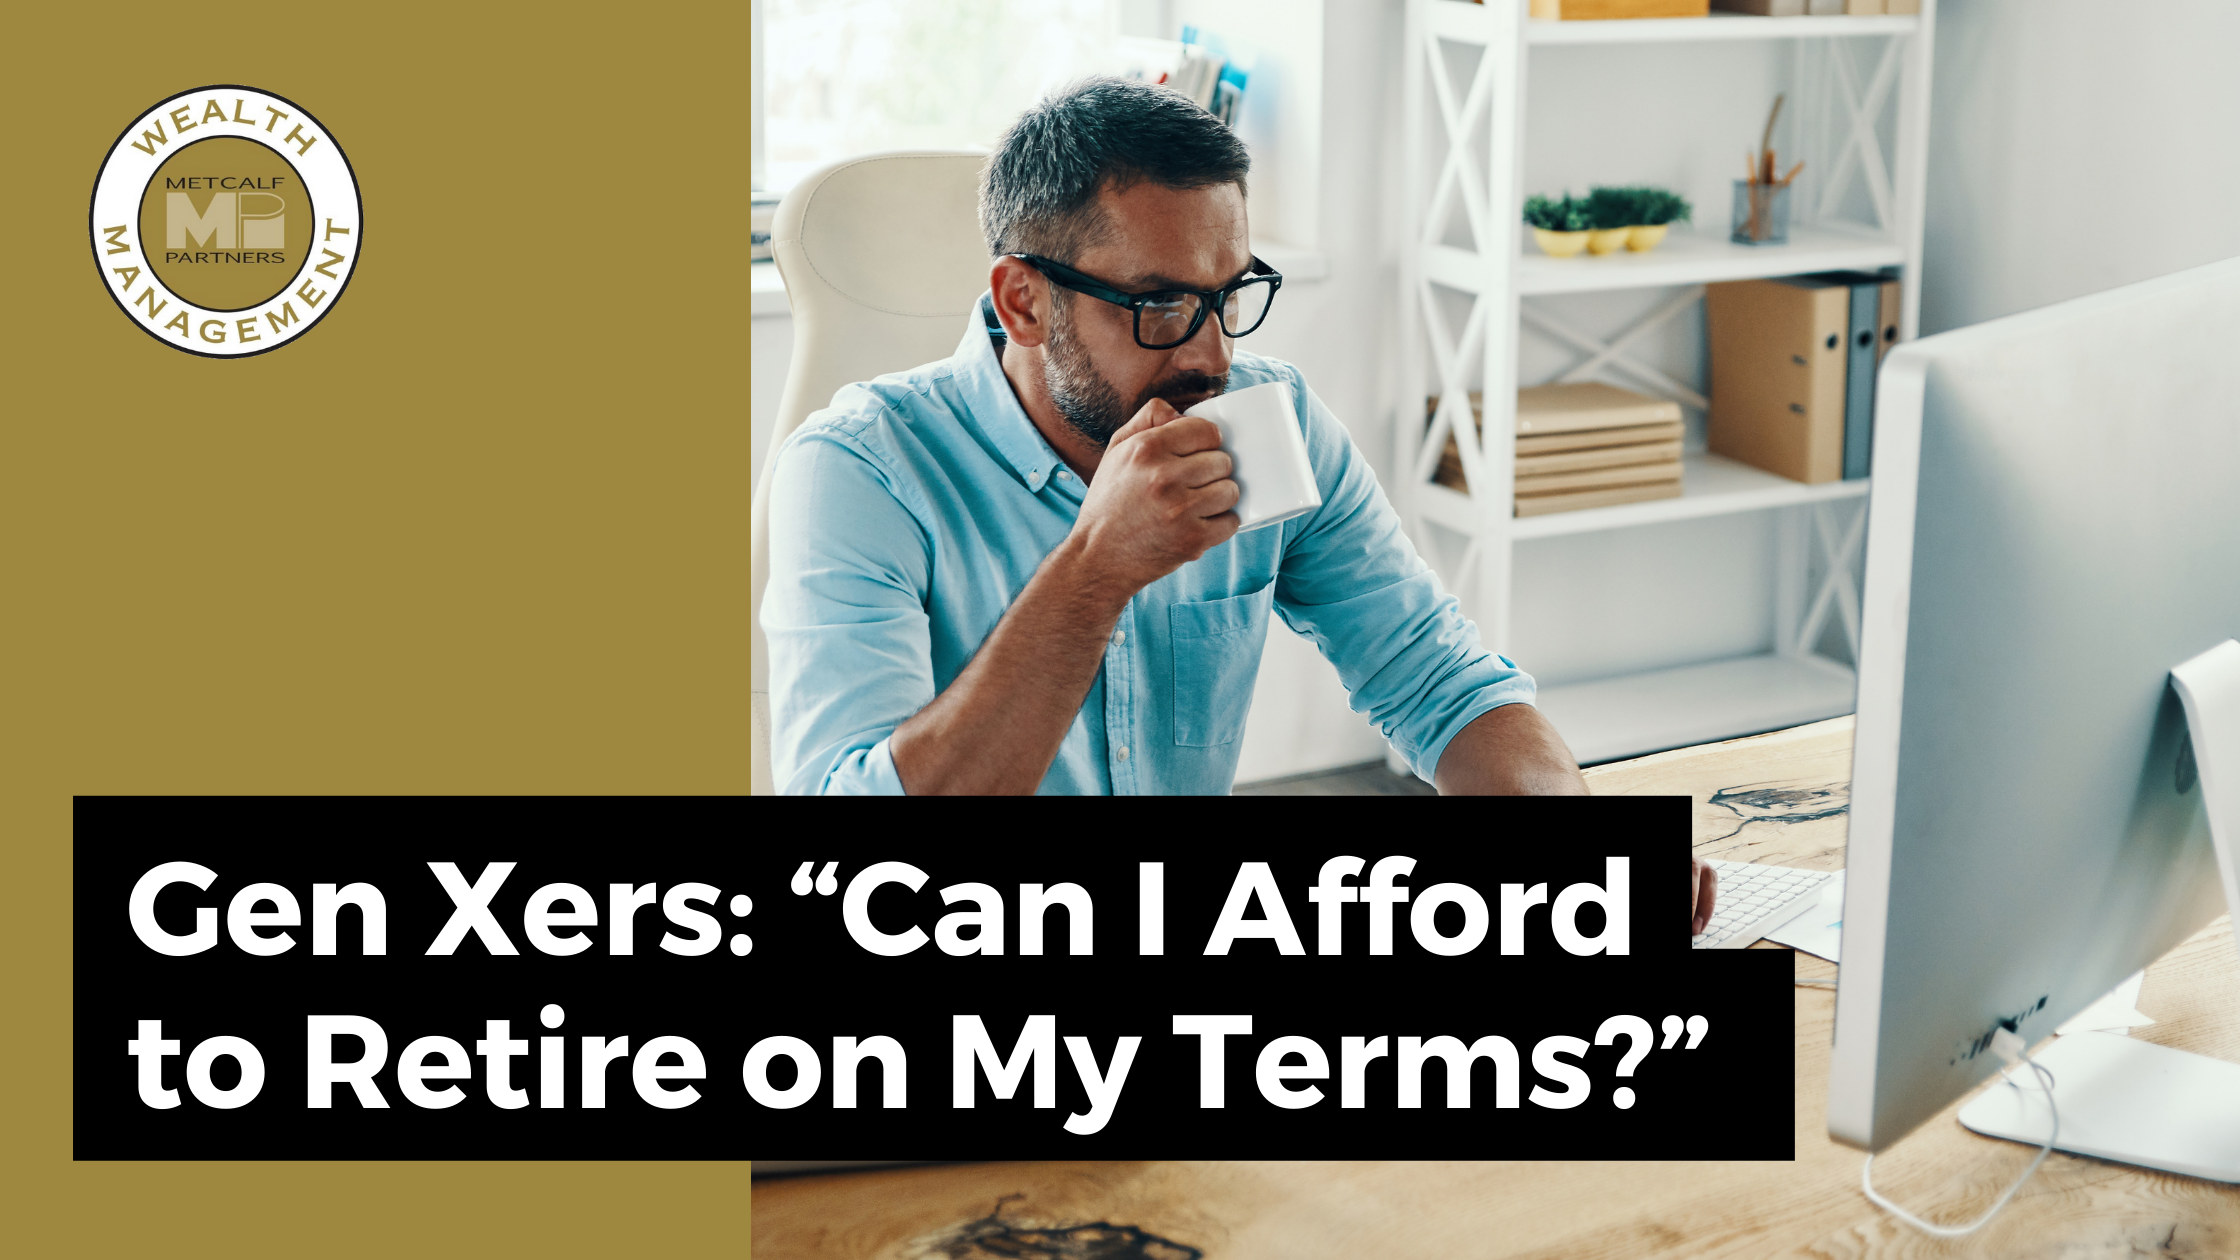 Featured image for “Gen Xers: “Can I Afford to Retire on My Terms?””